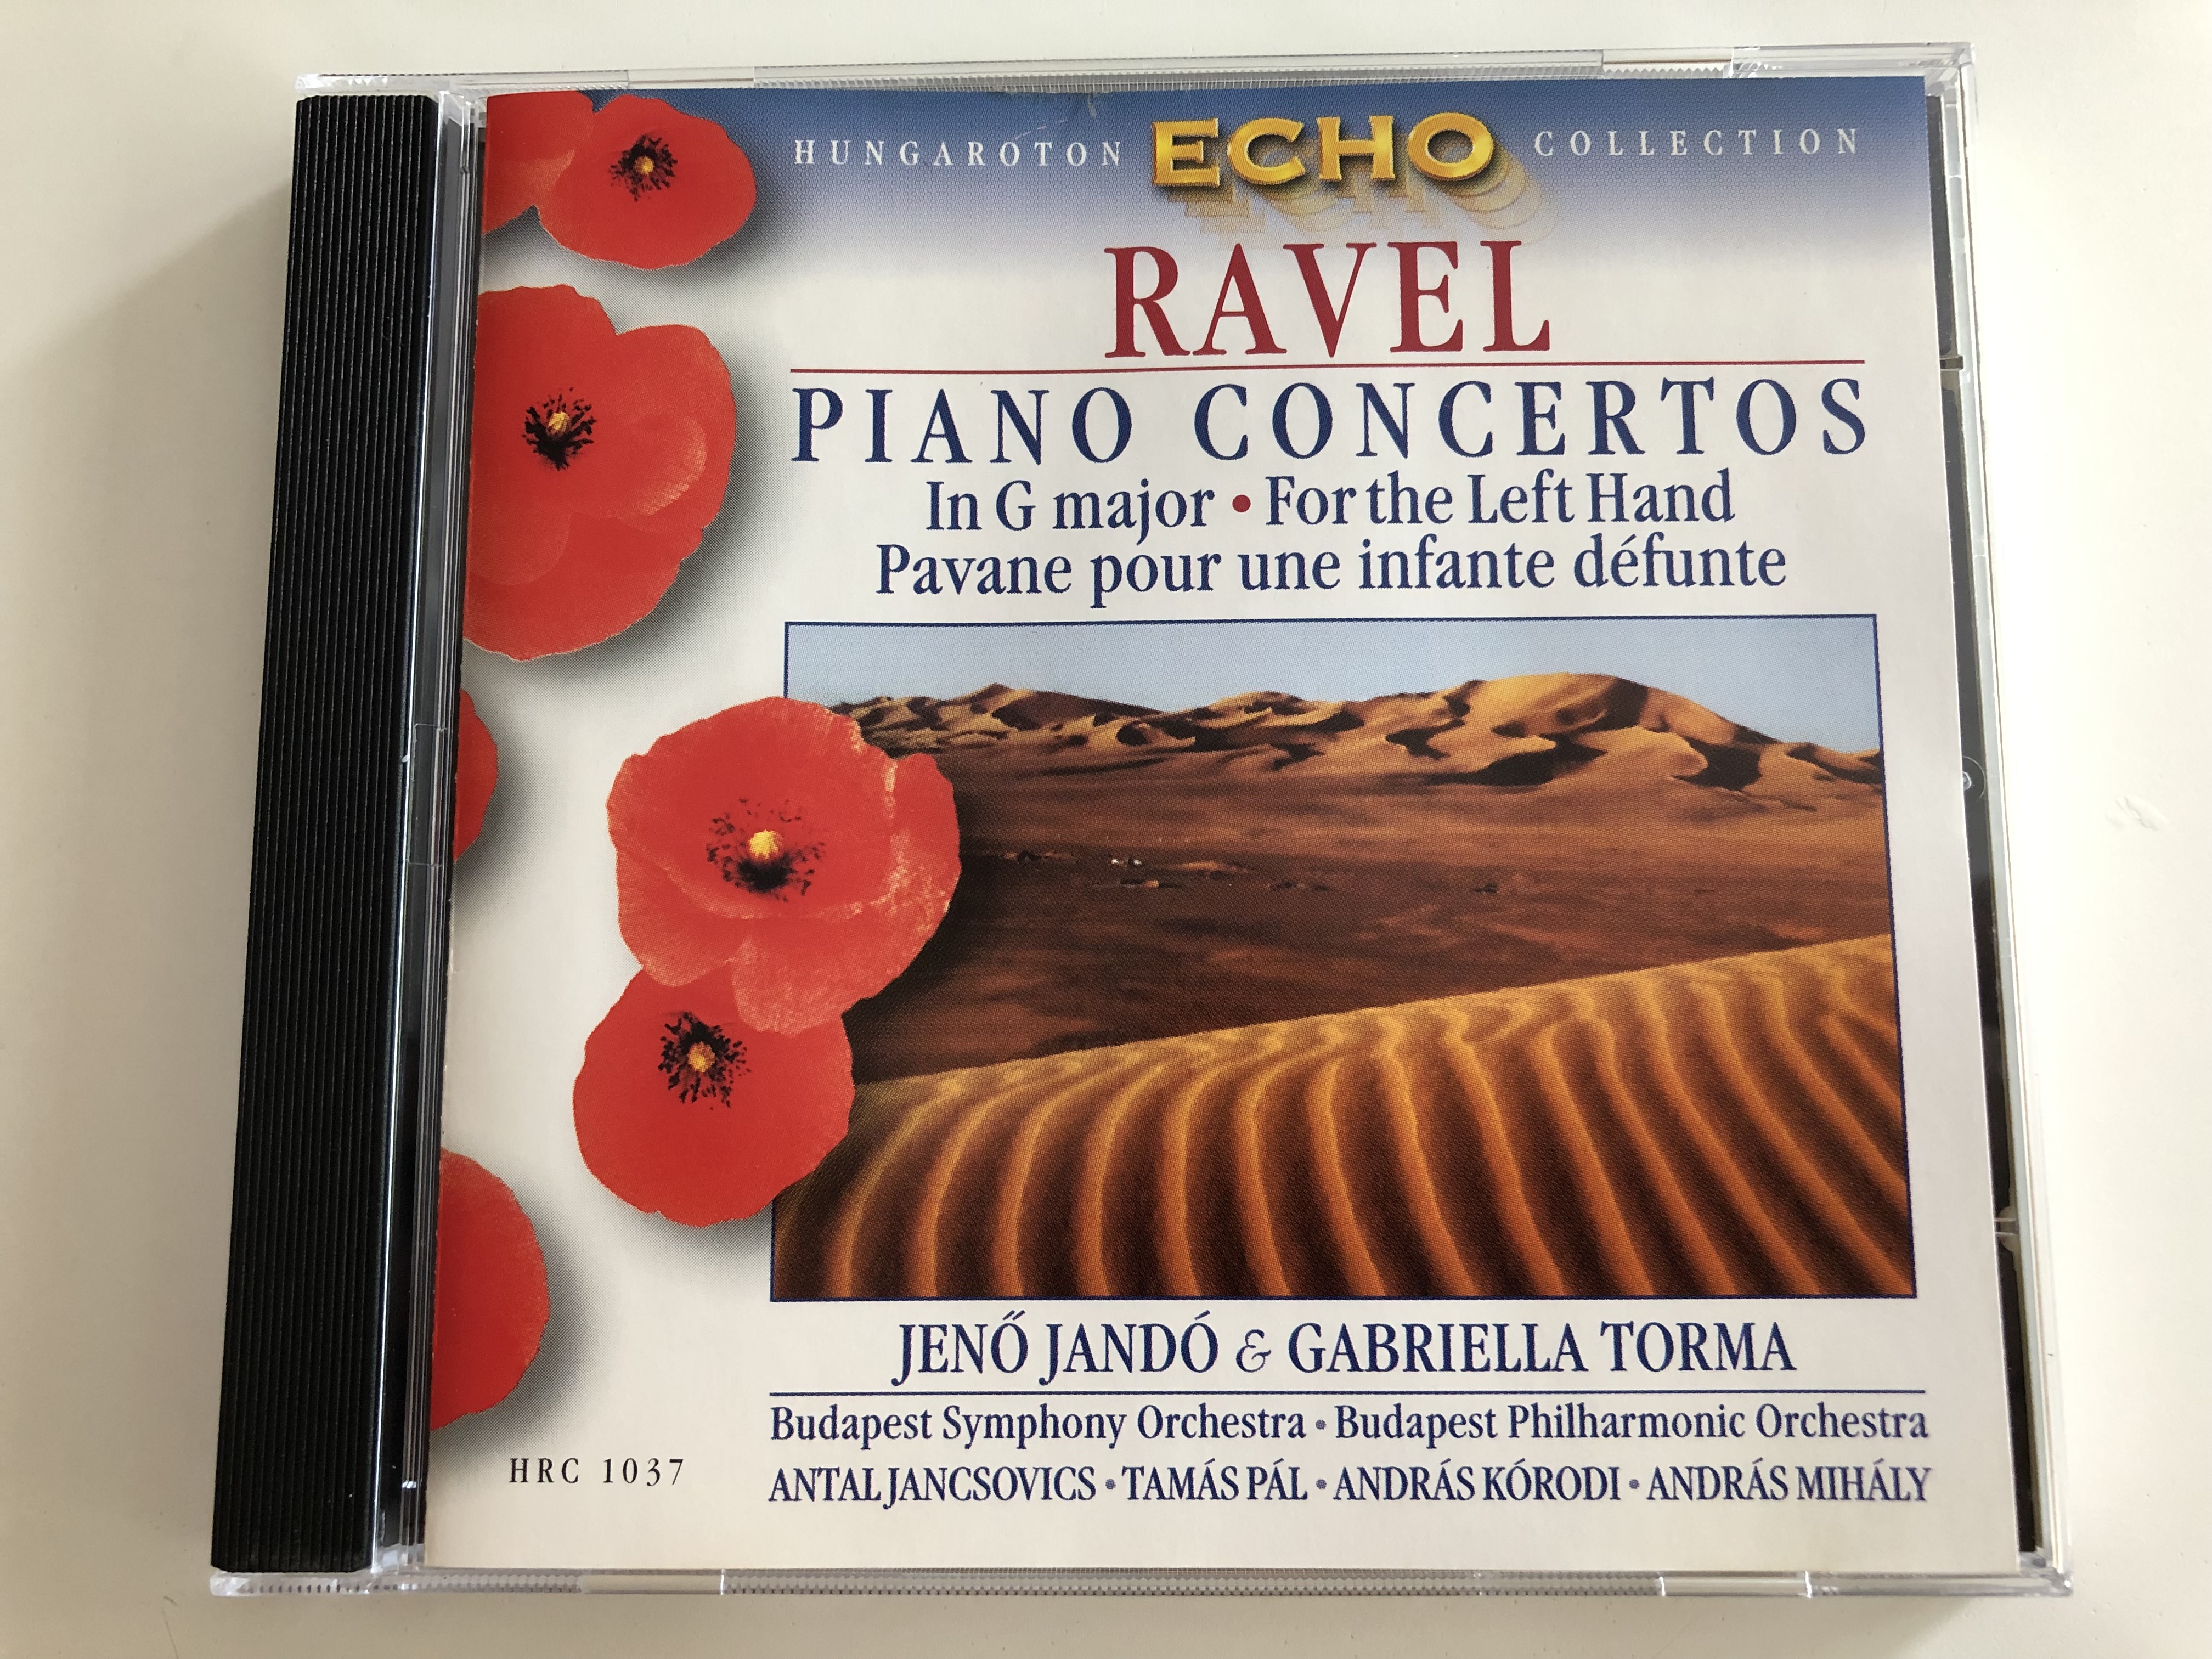 ravel-piano-concertos-in-g-major-for-the-left-hand-pavane-pour-une-infante-d-funte-budapest-symphony-orchestra-jen-jand-gabriella-torma-piano-hungaroton-echo-collection-hrc-1037-audio-cd-1999-1-.jpg